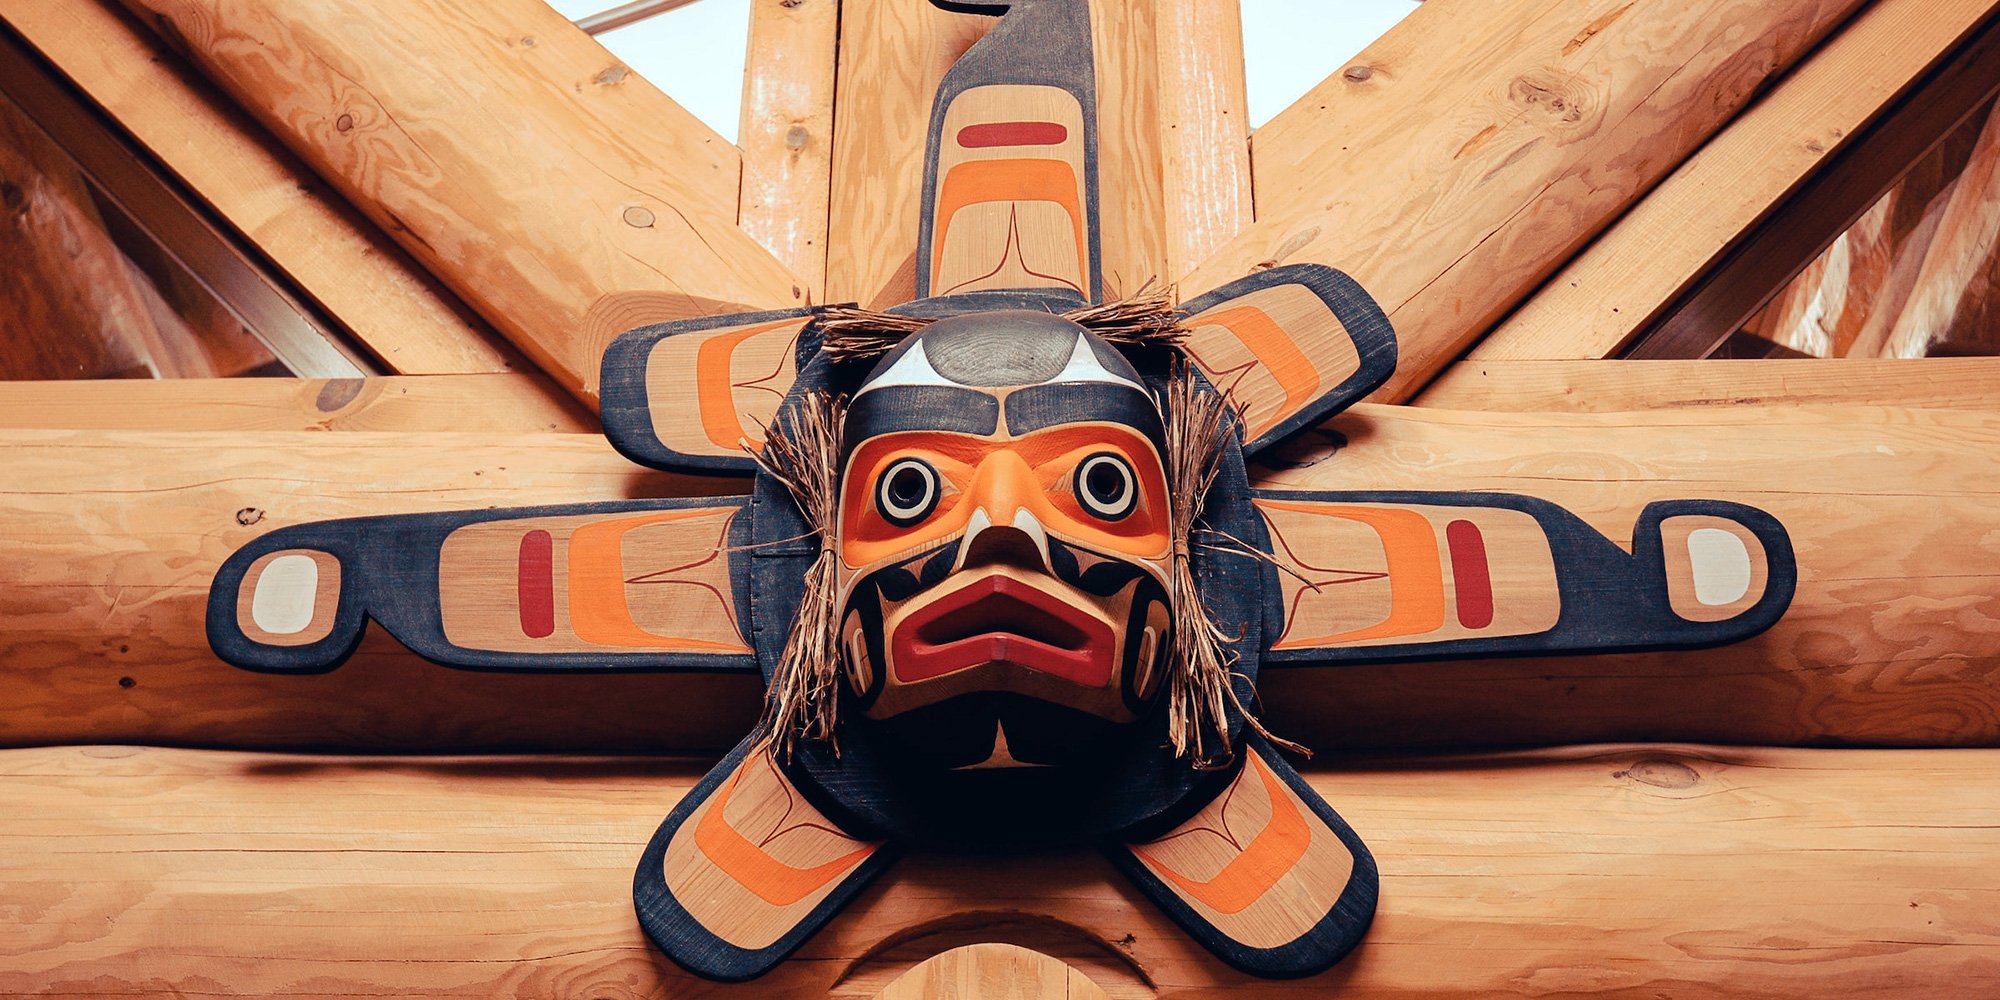 Indigenous mask on wall of cabin